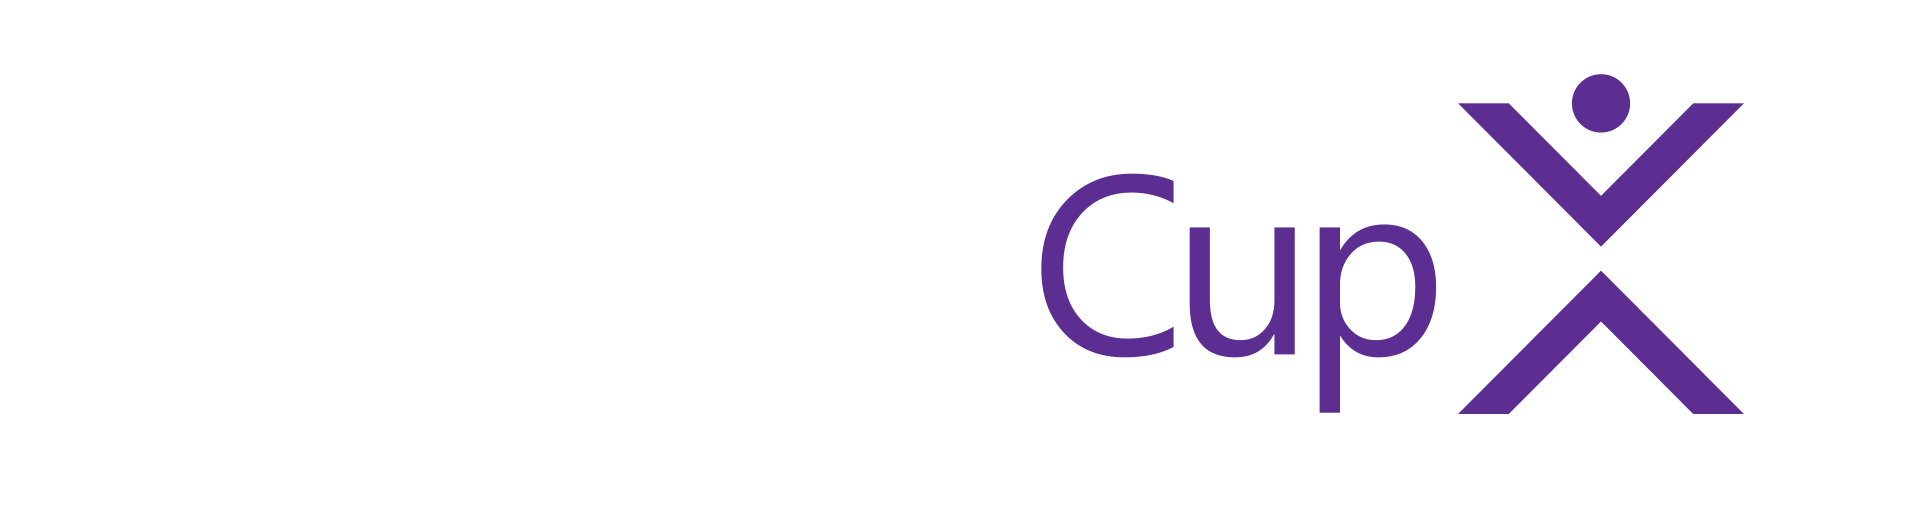 Logo of our partner Imagine Cup